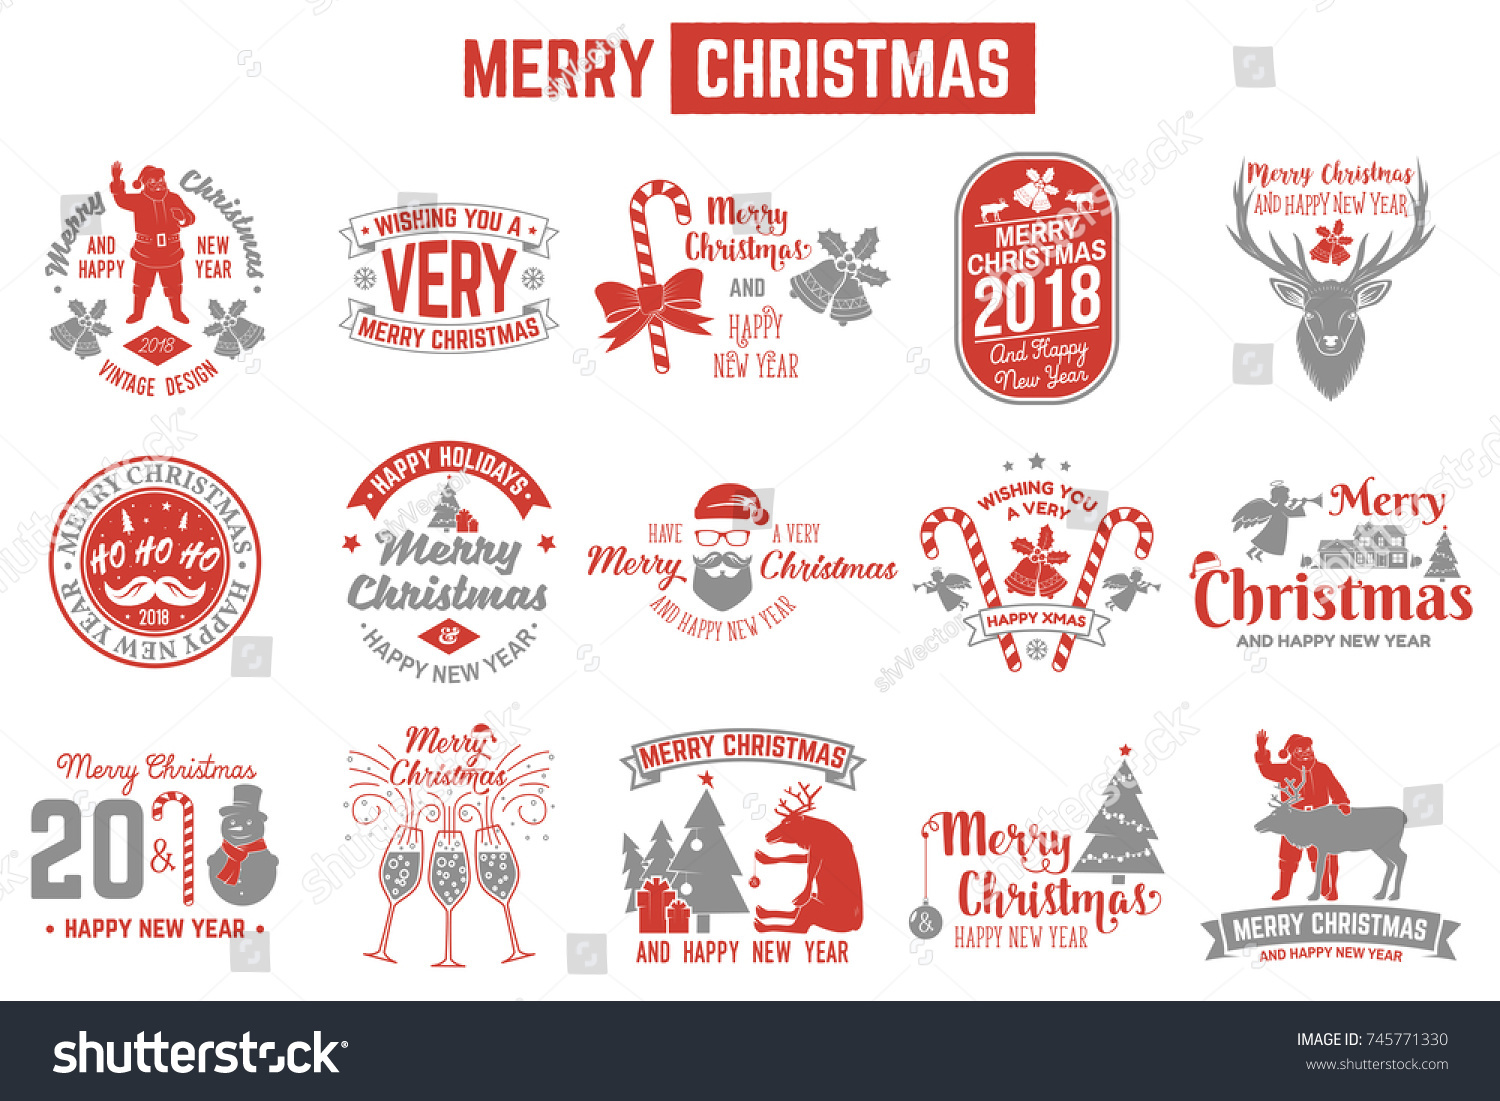 Merry Christmas and Happy New Year 2018 retro template with Santa Claus Christmas tree